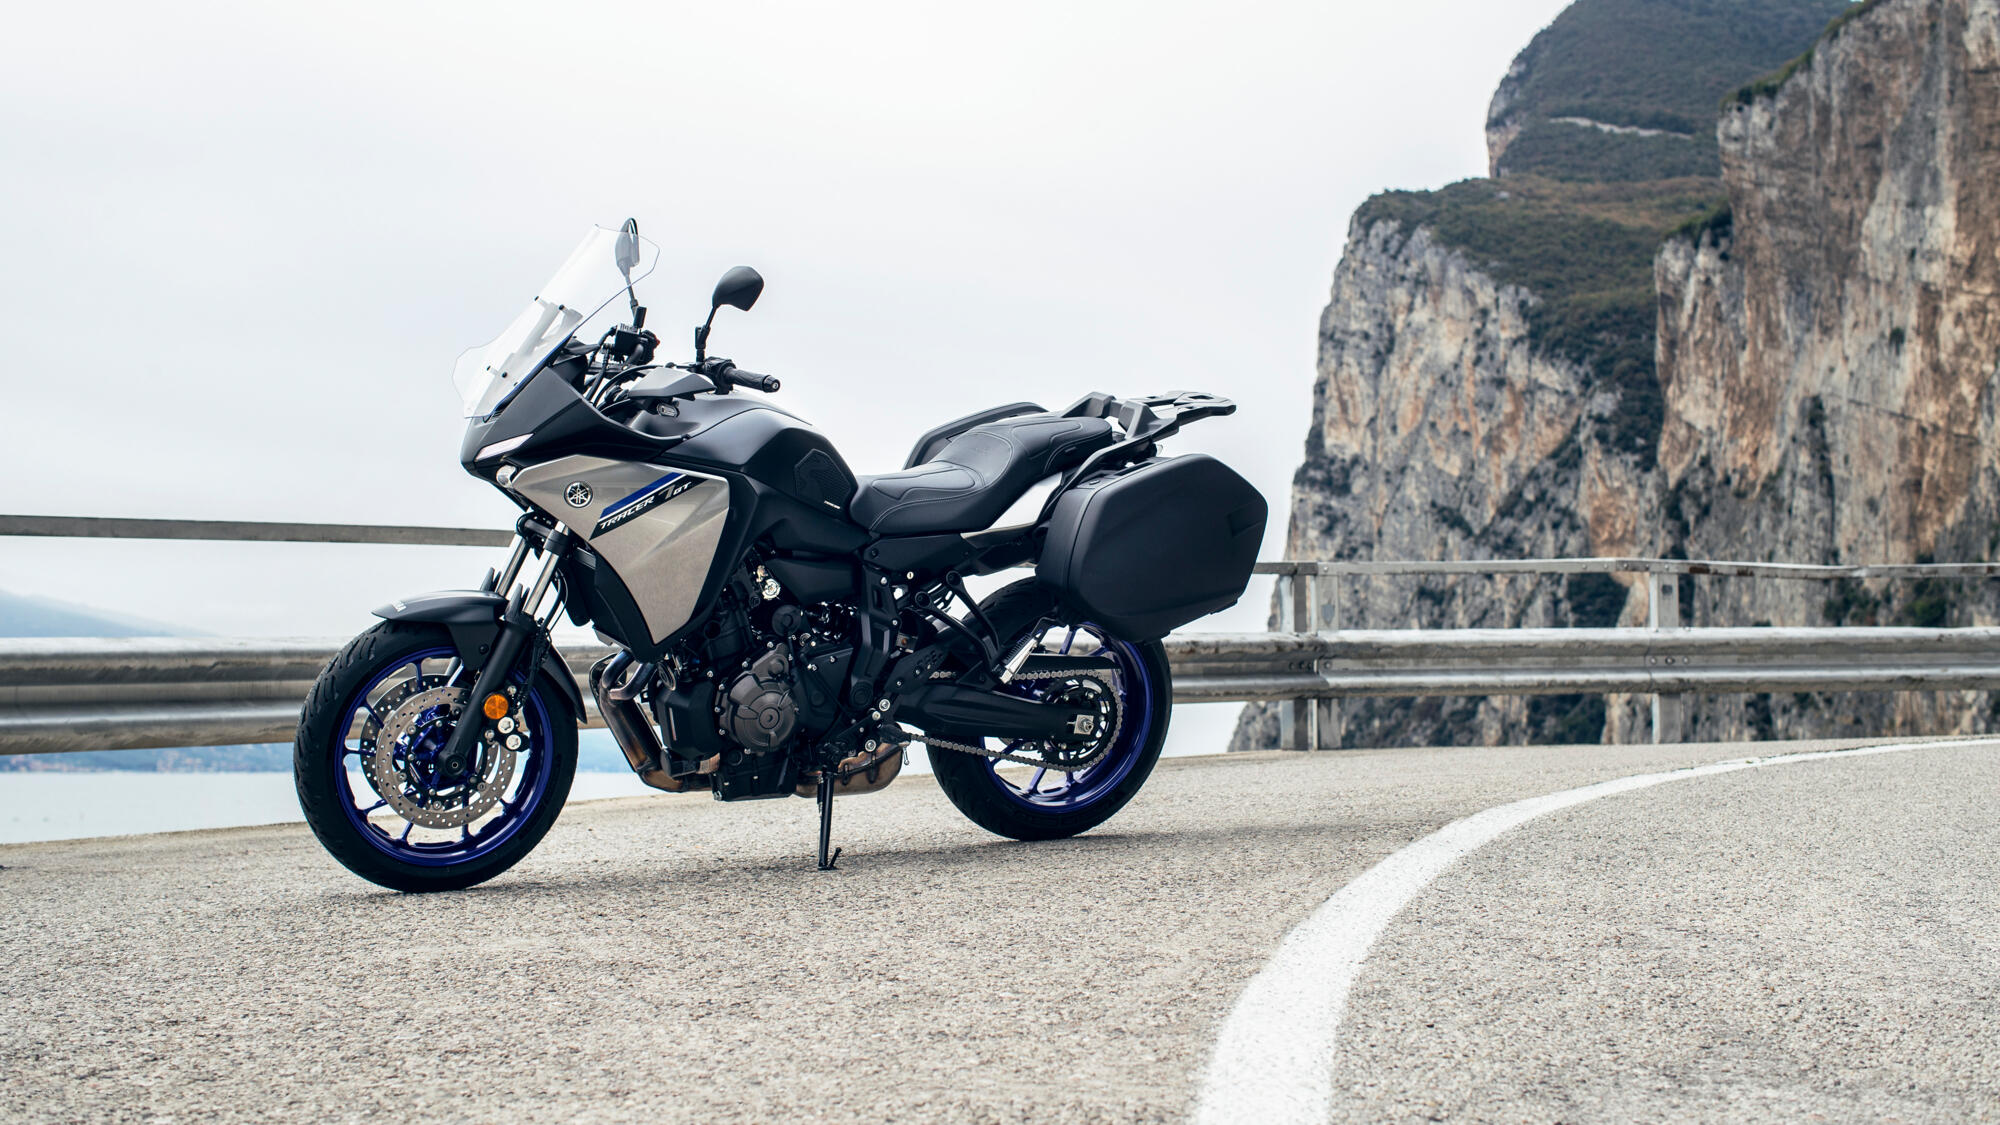 2023 Yamaha Tracer 7 line in detail: Technical and ergo